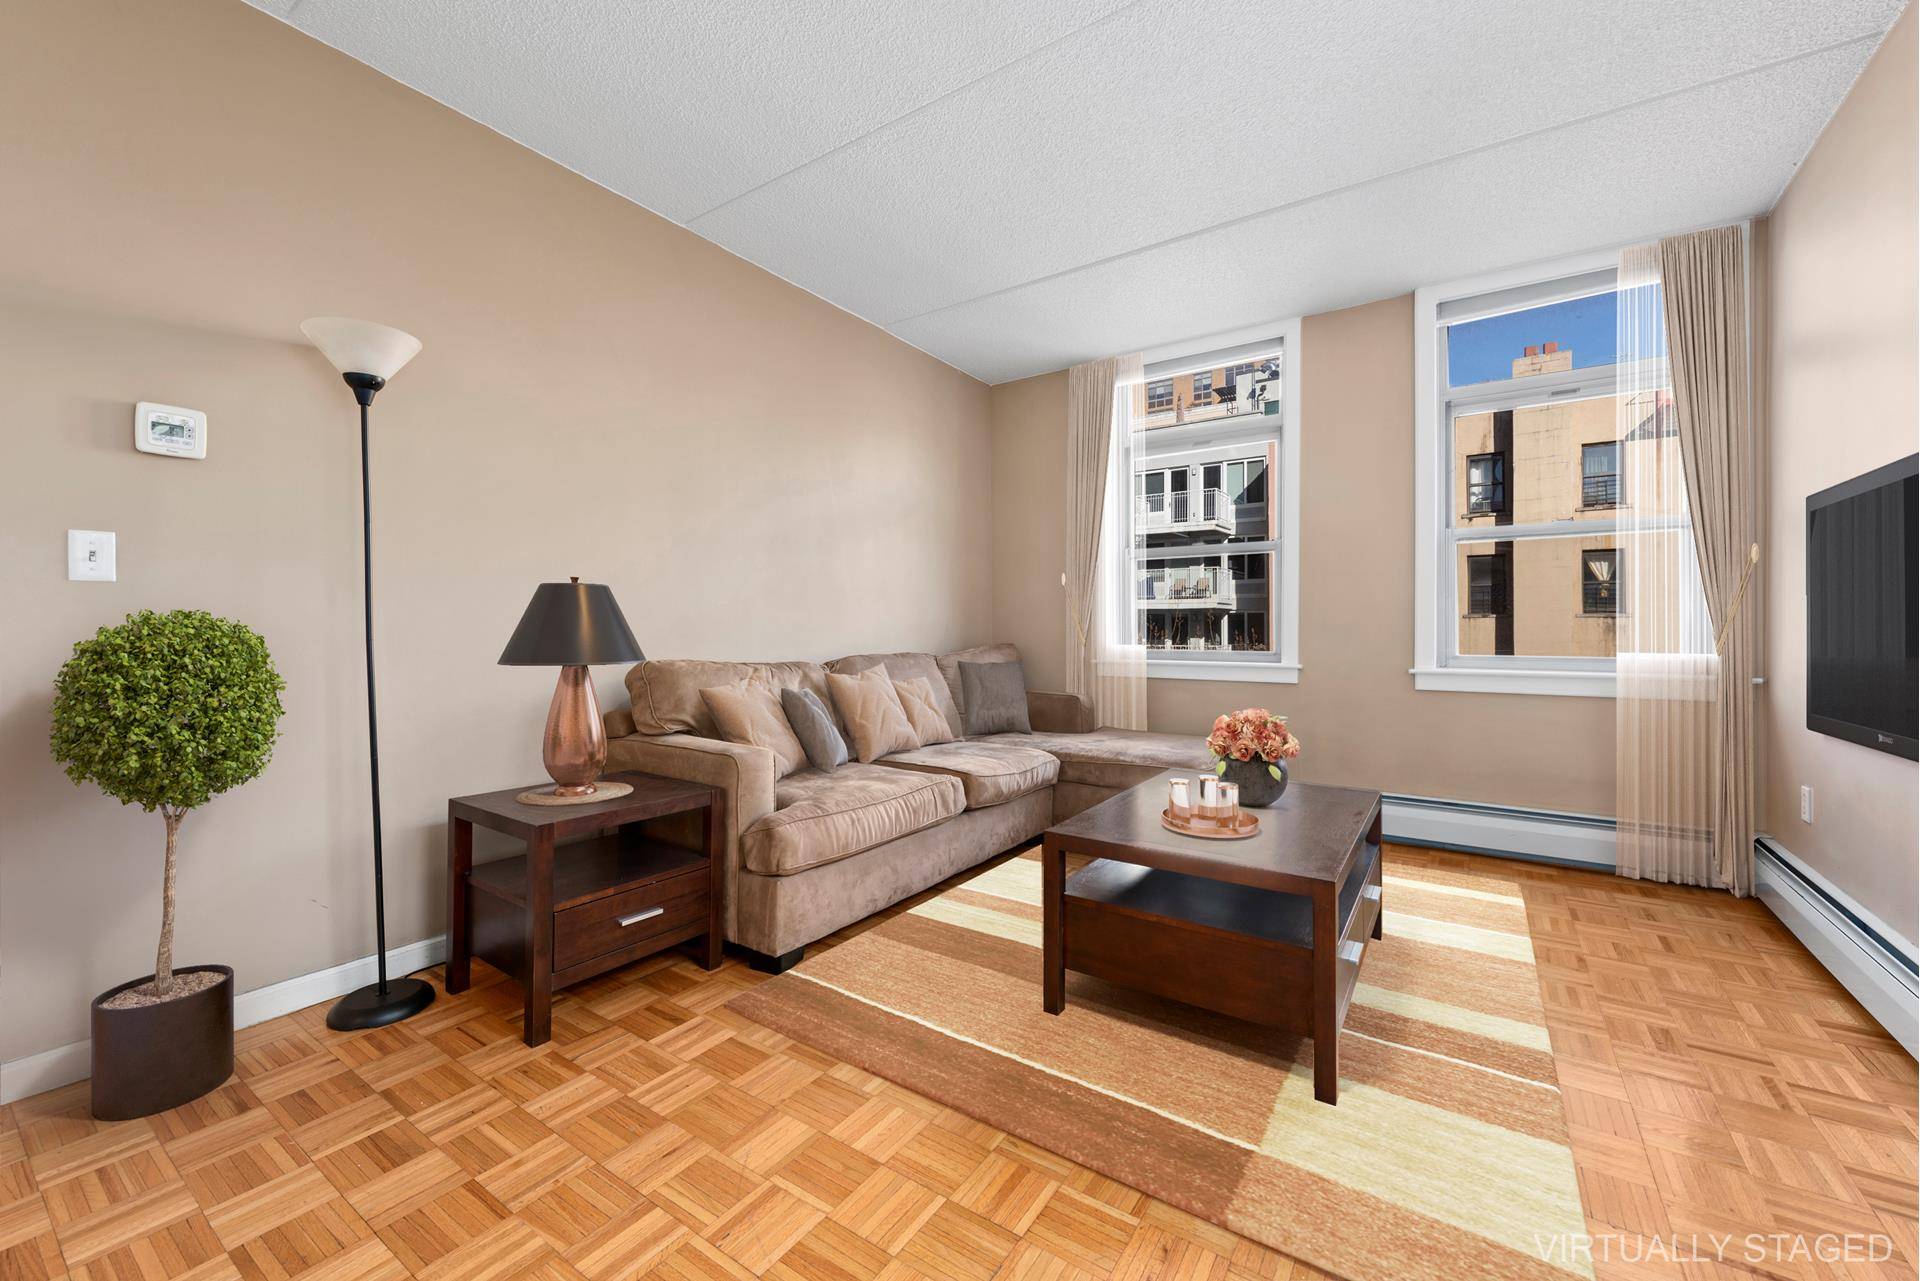 Corner 2 bedroom, 2 full bathroom unit at The Sutton boasting 8' 8 inch high ceilings, wood floors, comparable large bedrooms, an open windowed eat in kitchen featuring a dishwasher ...